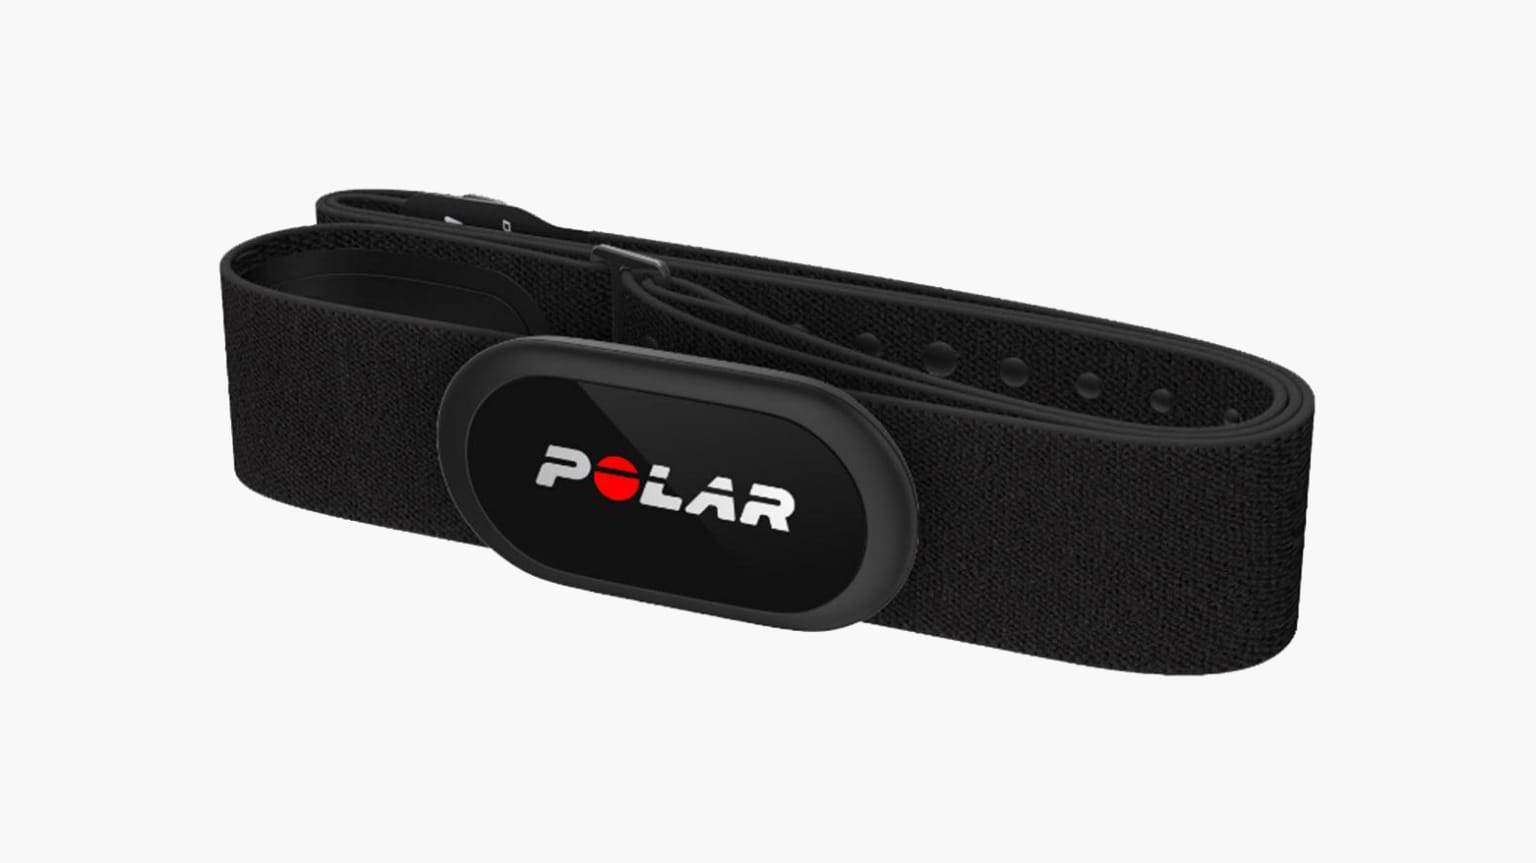 The Polar H10 sensor is placed on the body.